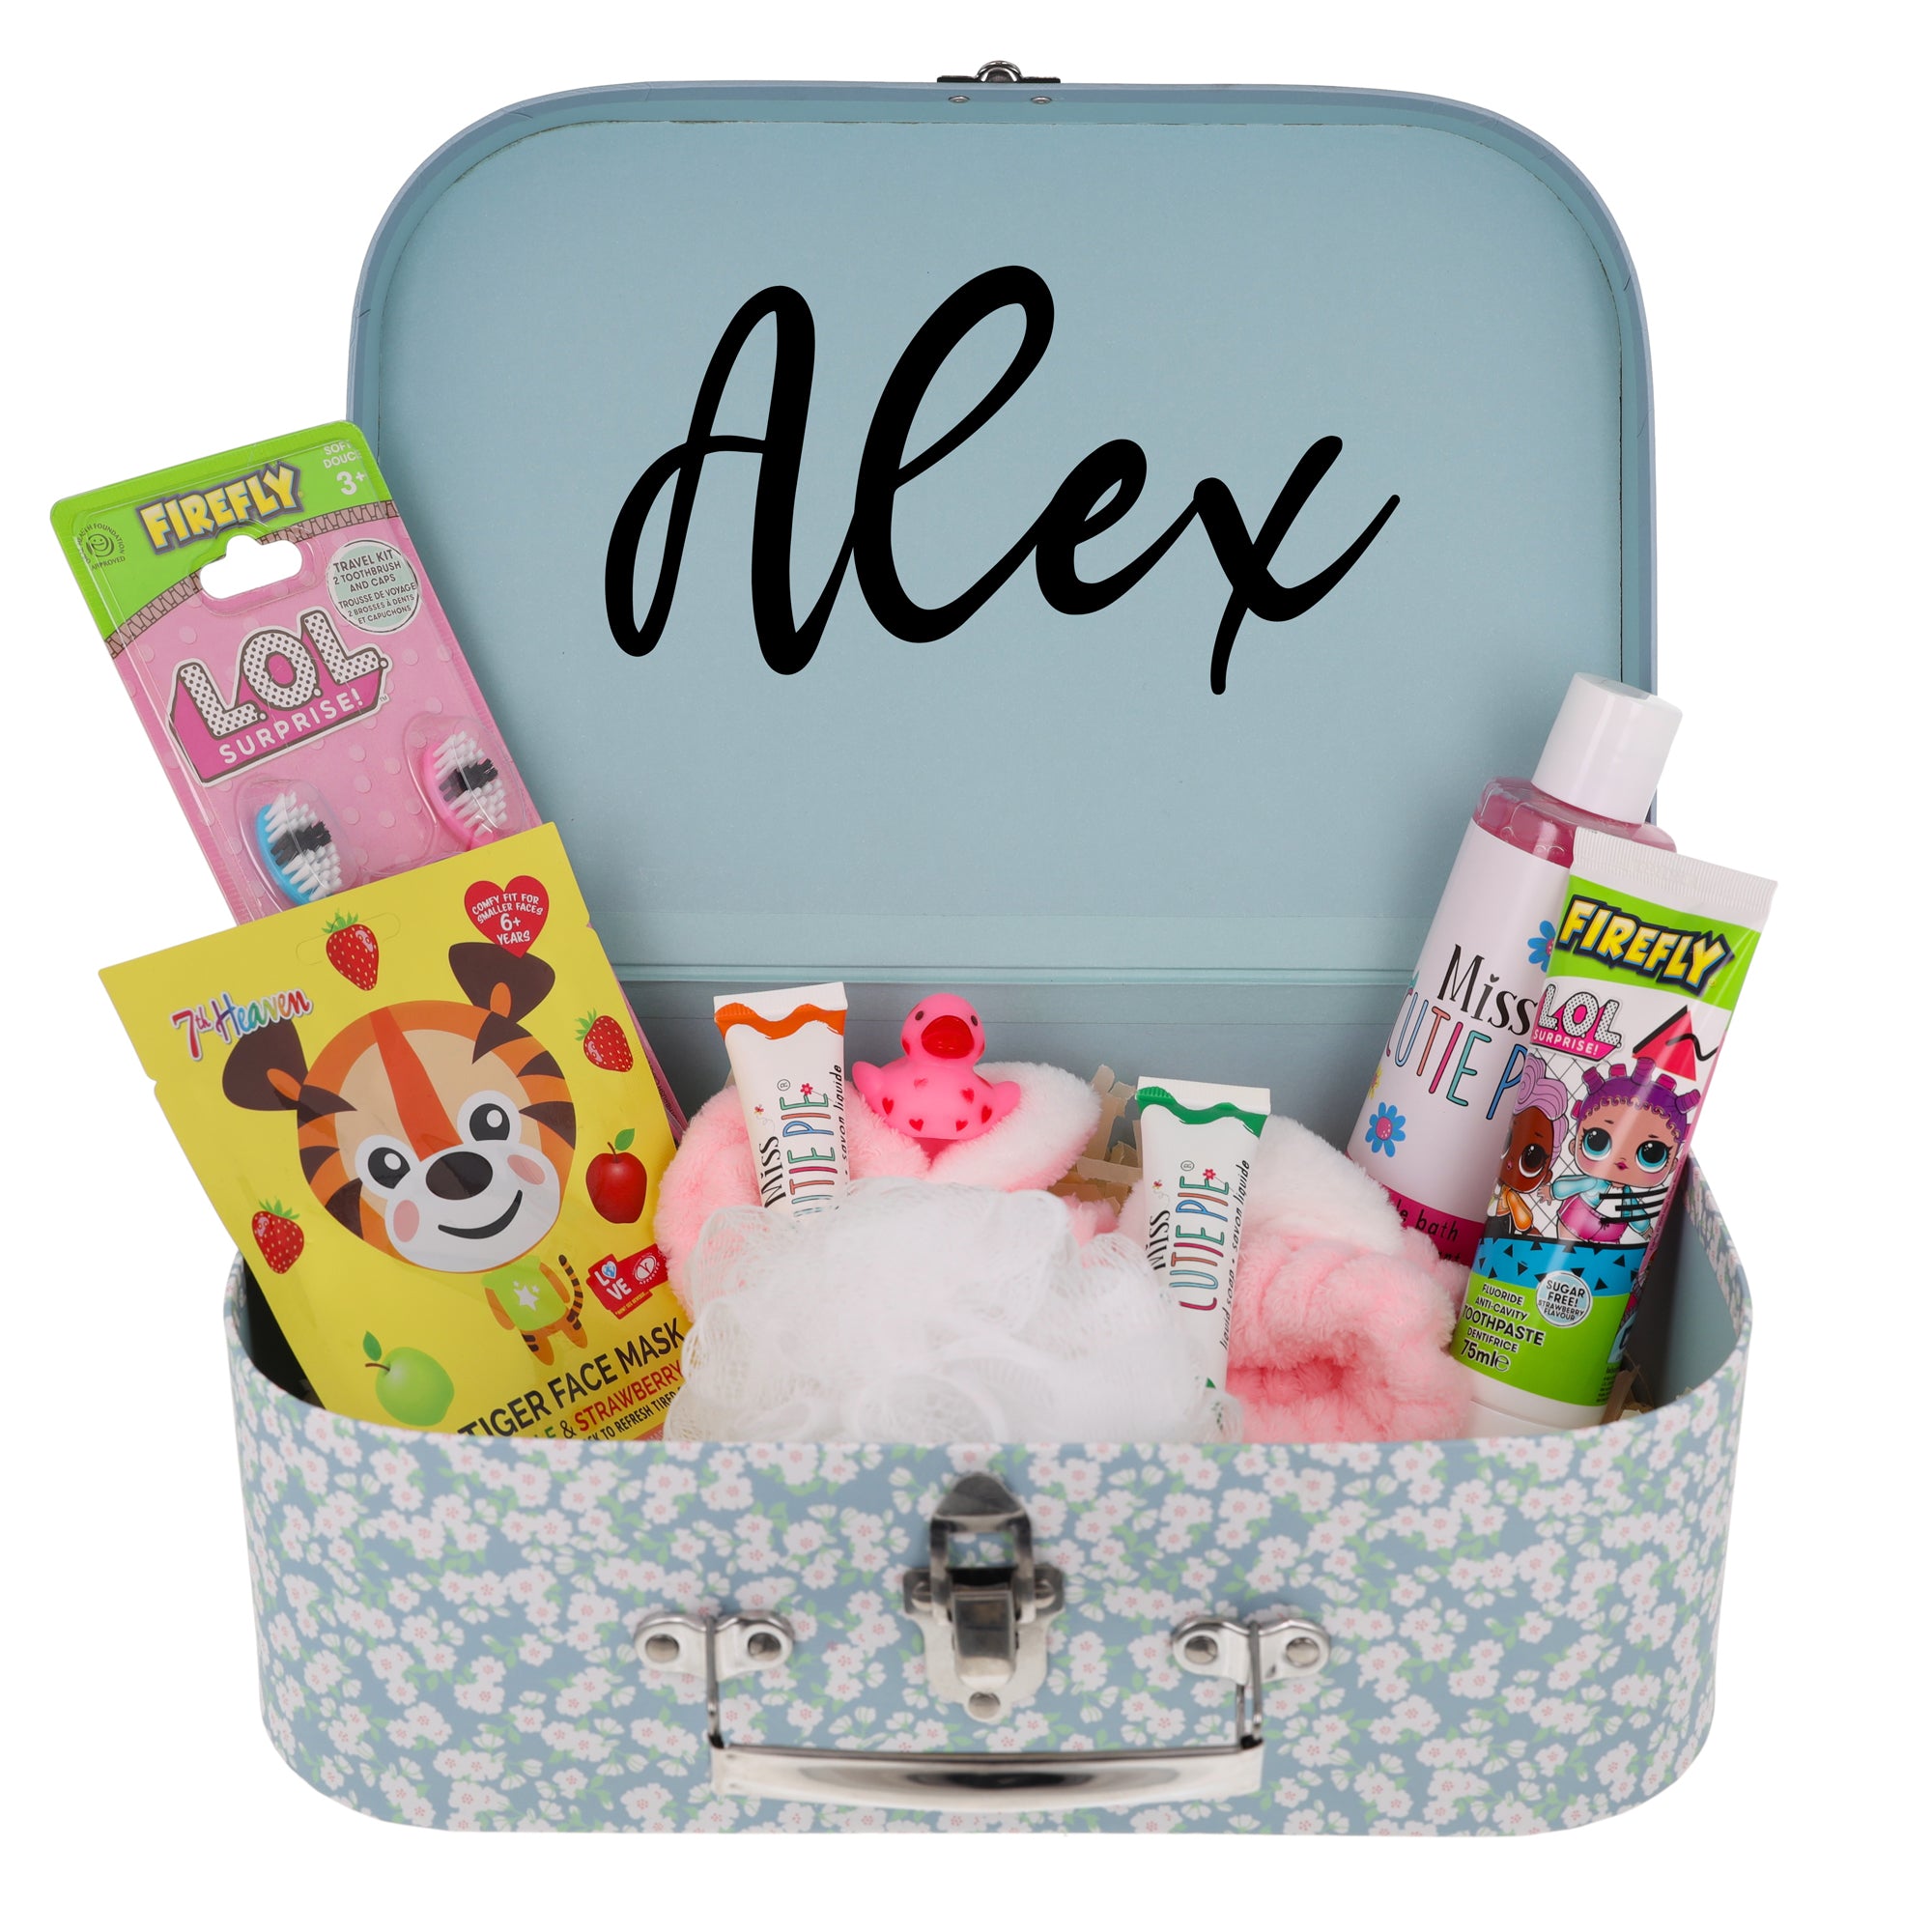 Personalised Birthday Gifts for Kids - Personal Chic